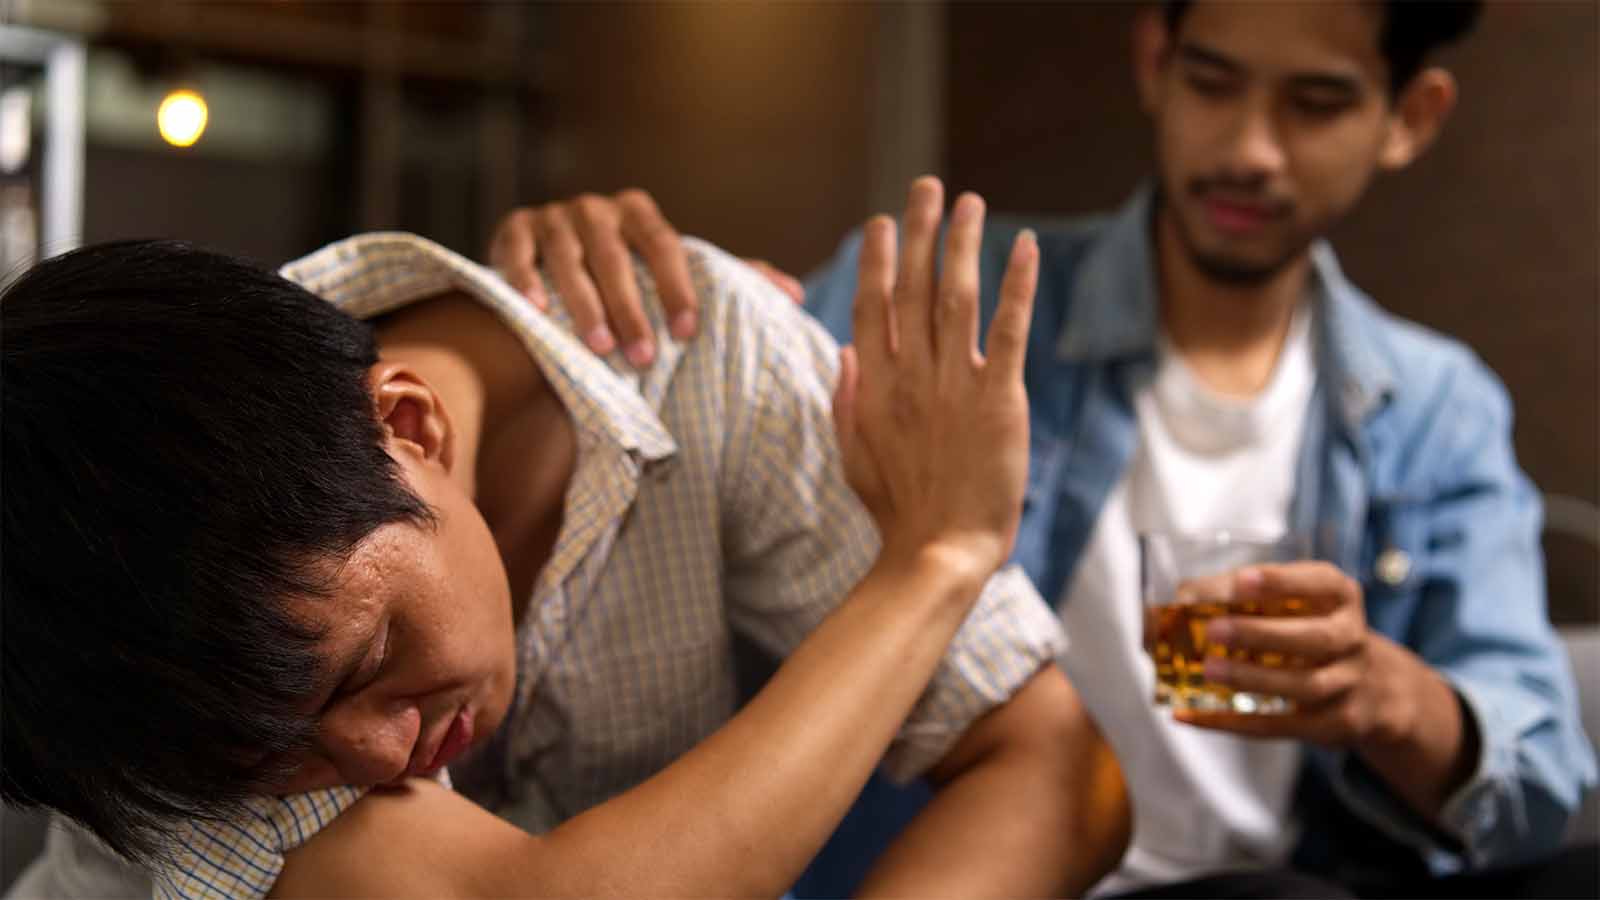 CCFA's Top Tips on How to Stop Drinking Alcohol for Good